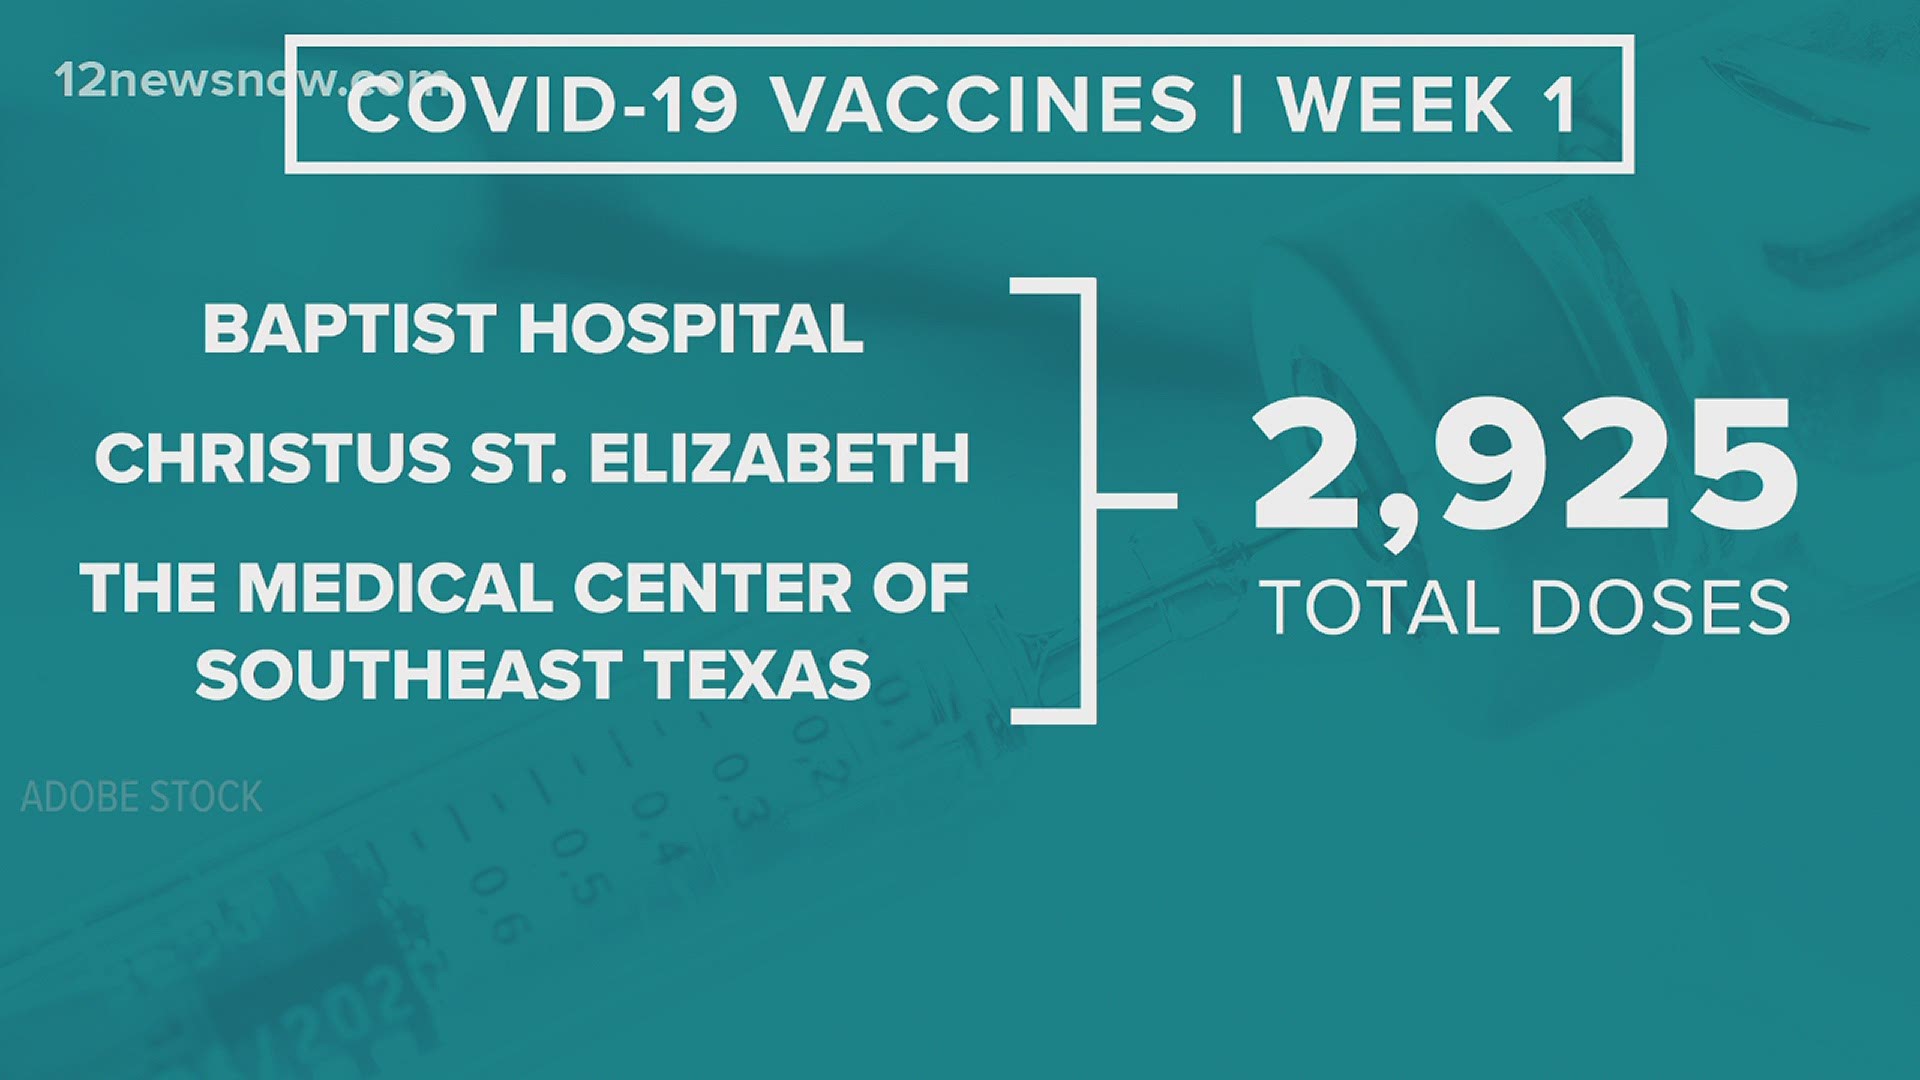 Here are the top COVID-19 headlines for Friday. For more updates, visit 12Newsnow.com/coronavirus.